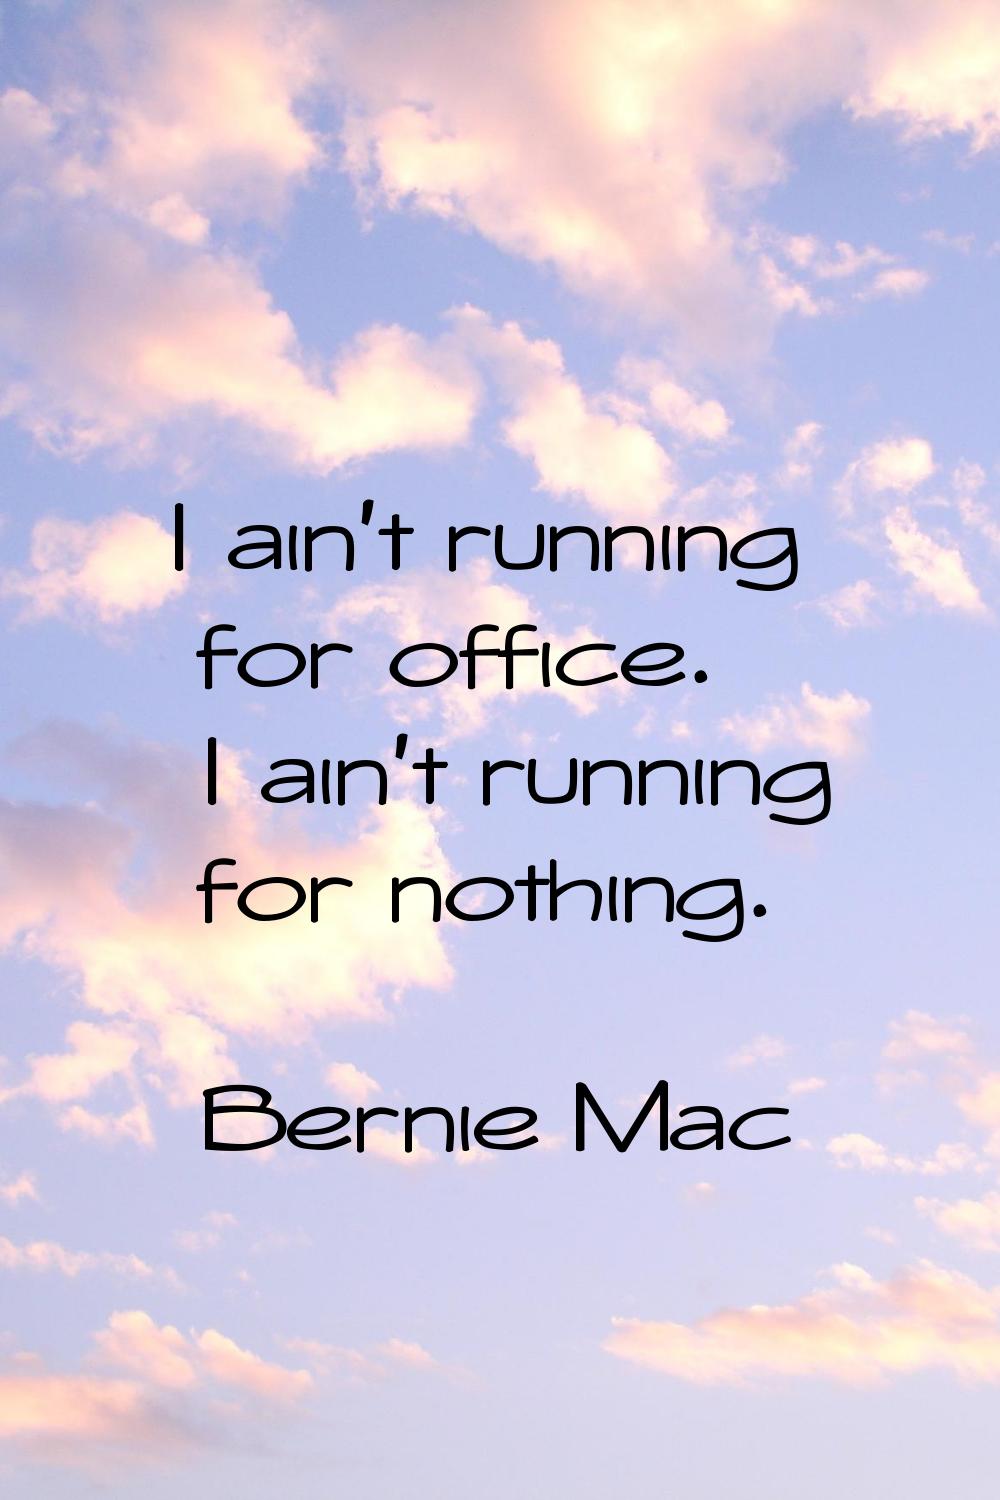 I ain't running for office. I ain't running for nothing.